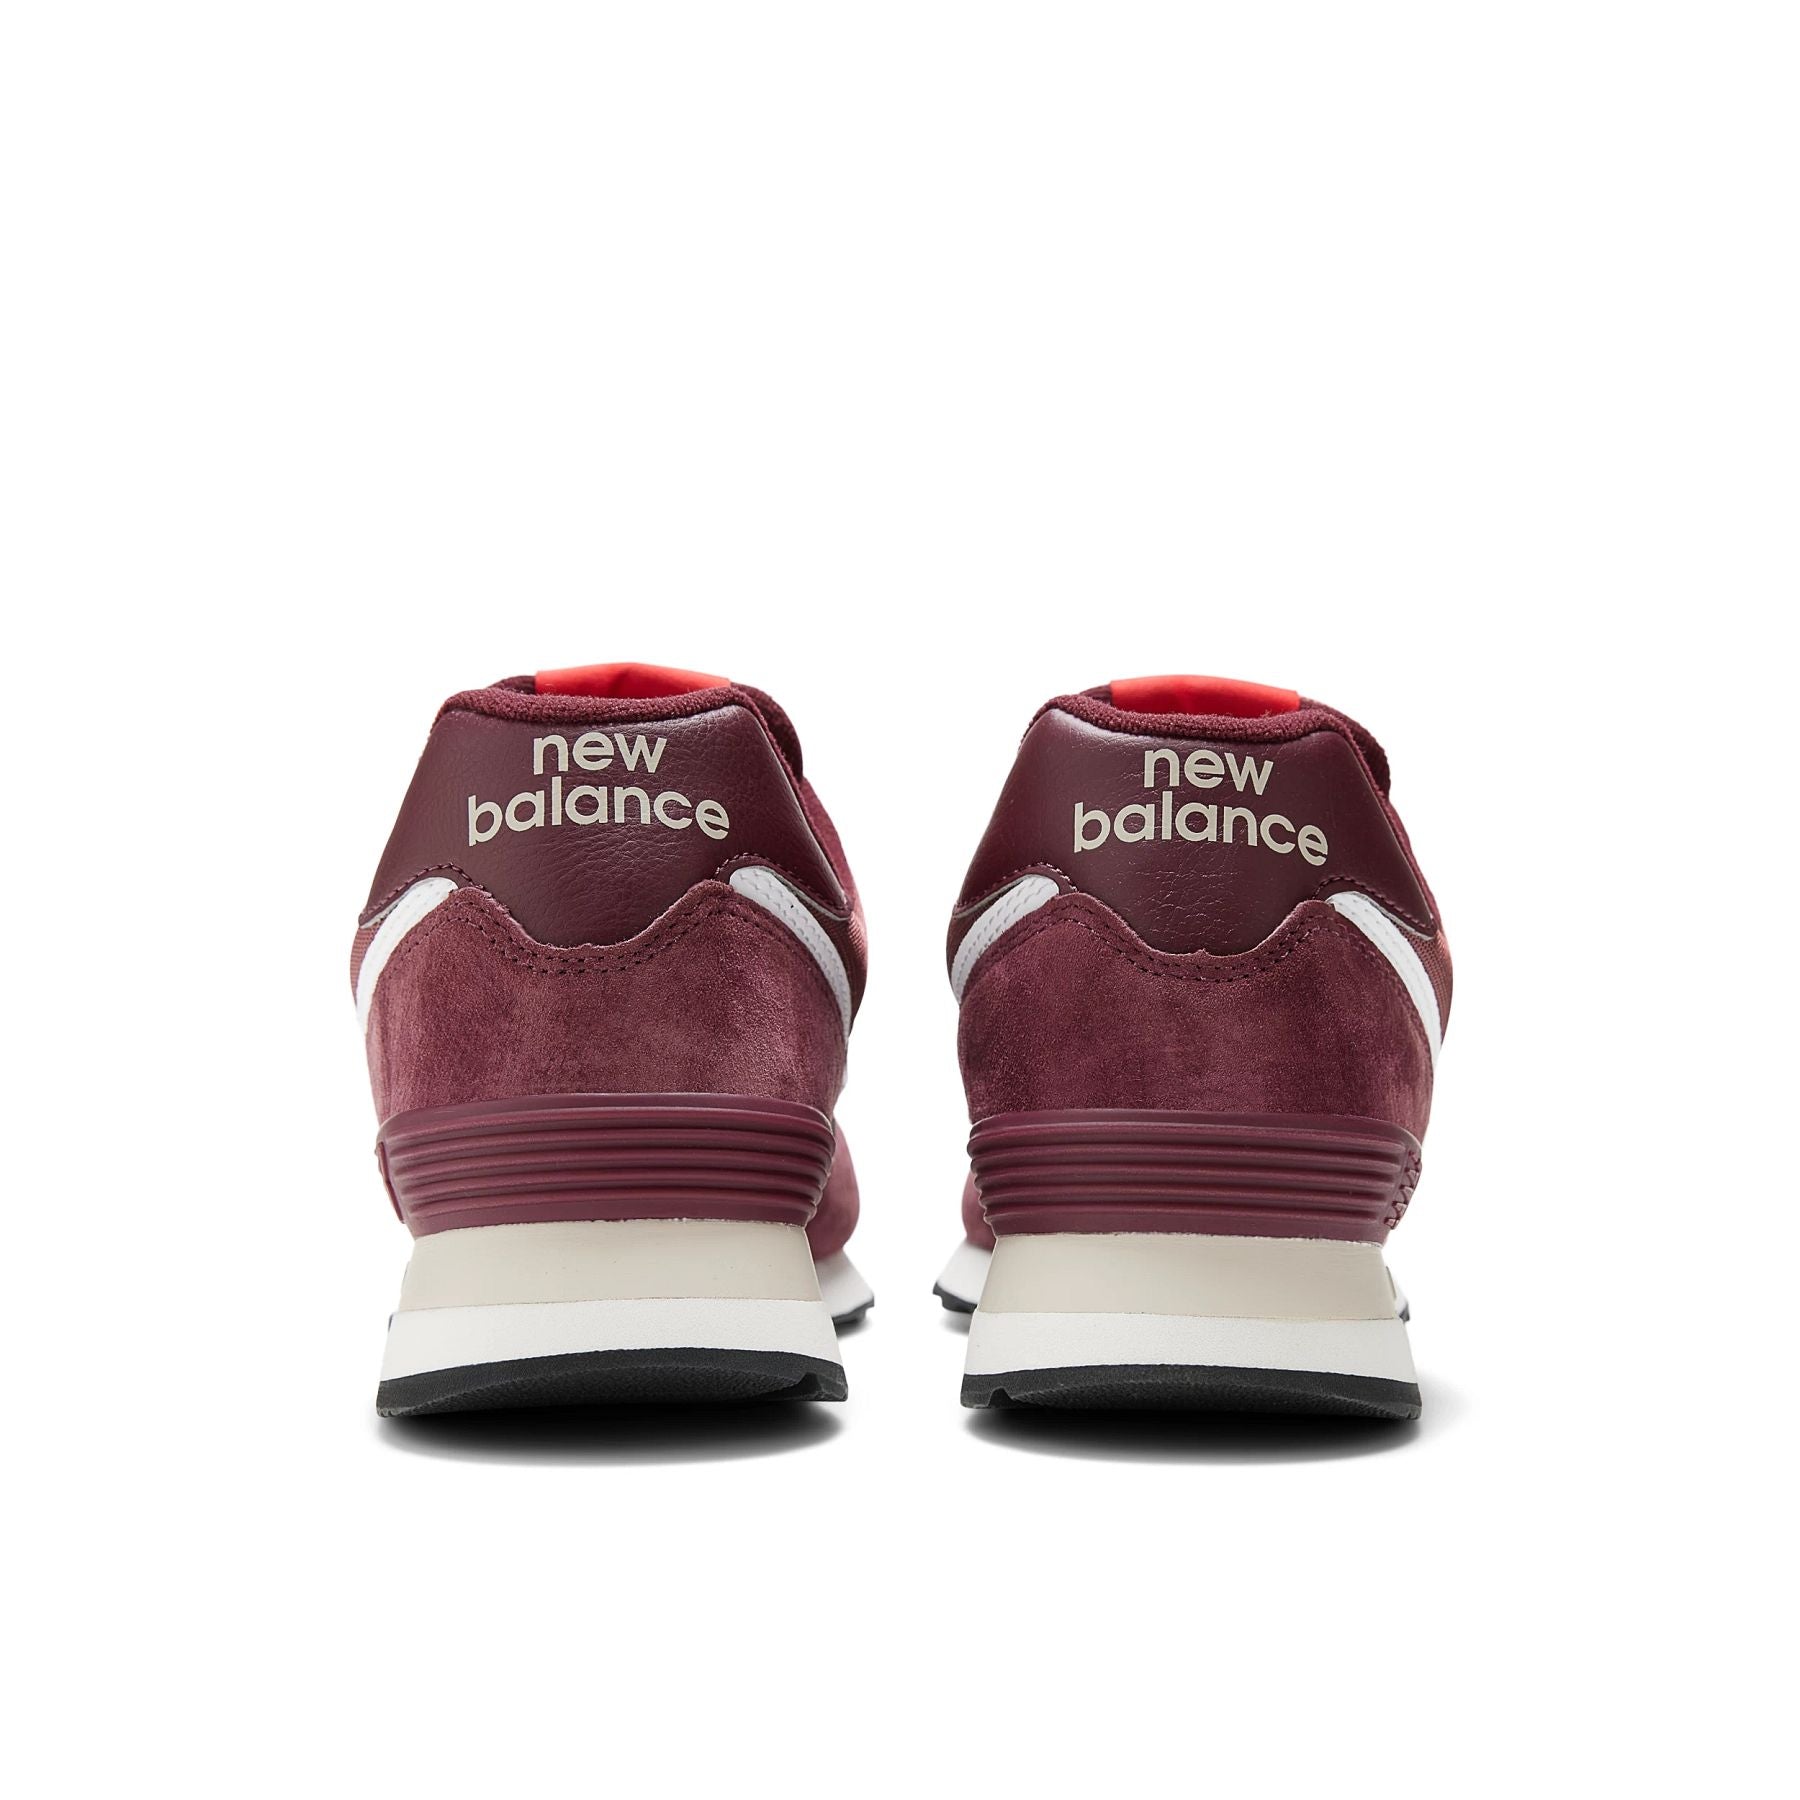 Back view of the Men's 574 in Maroon/Grey